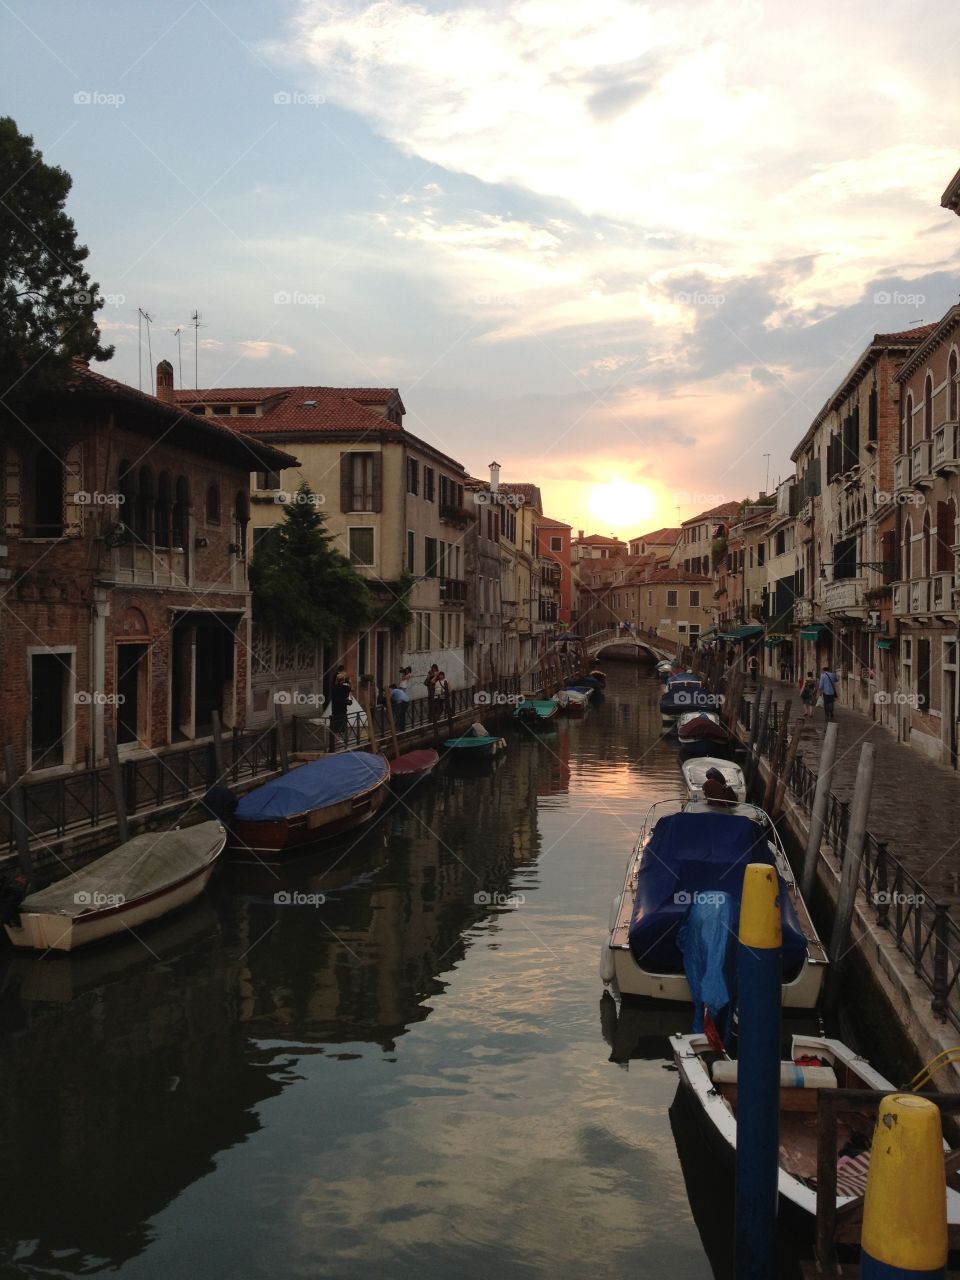 One of the many canals of Venice, Italy at sunset